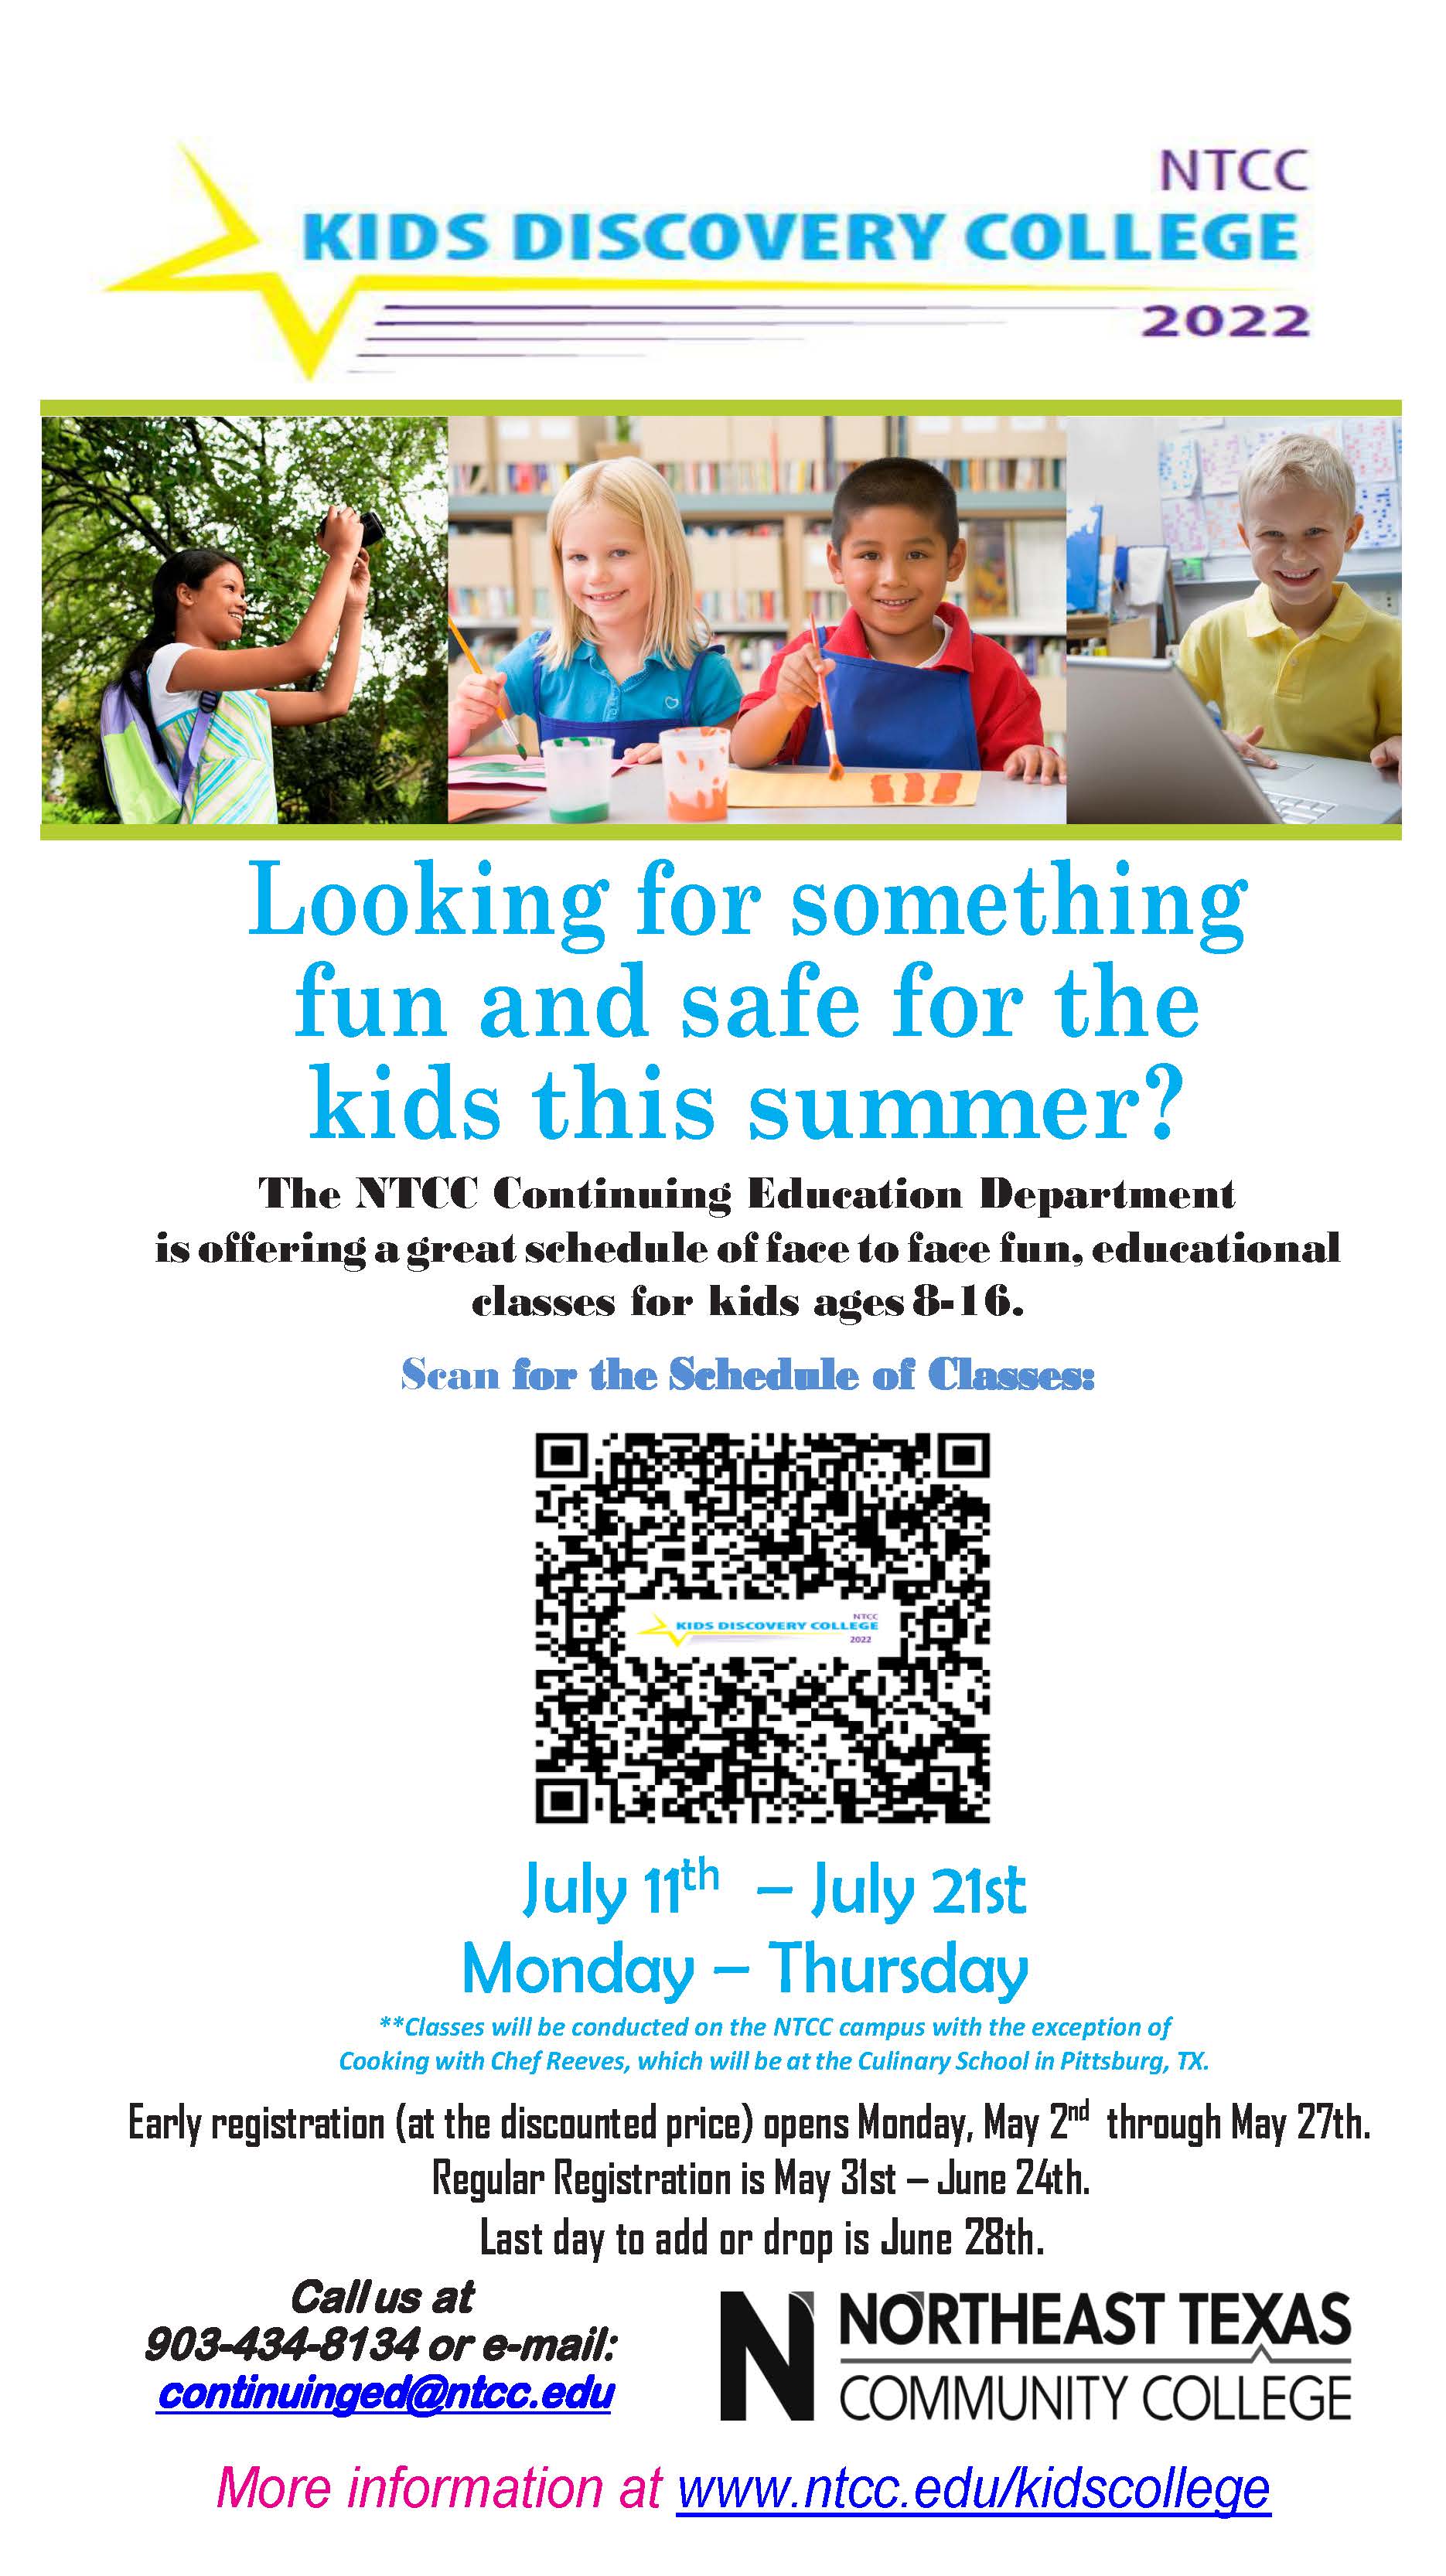 Kids Discovery College Event Poster